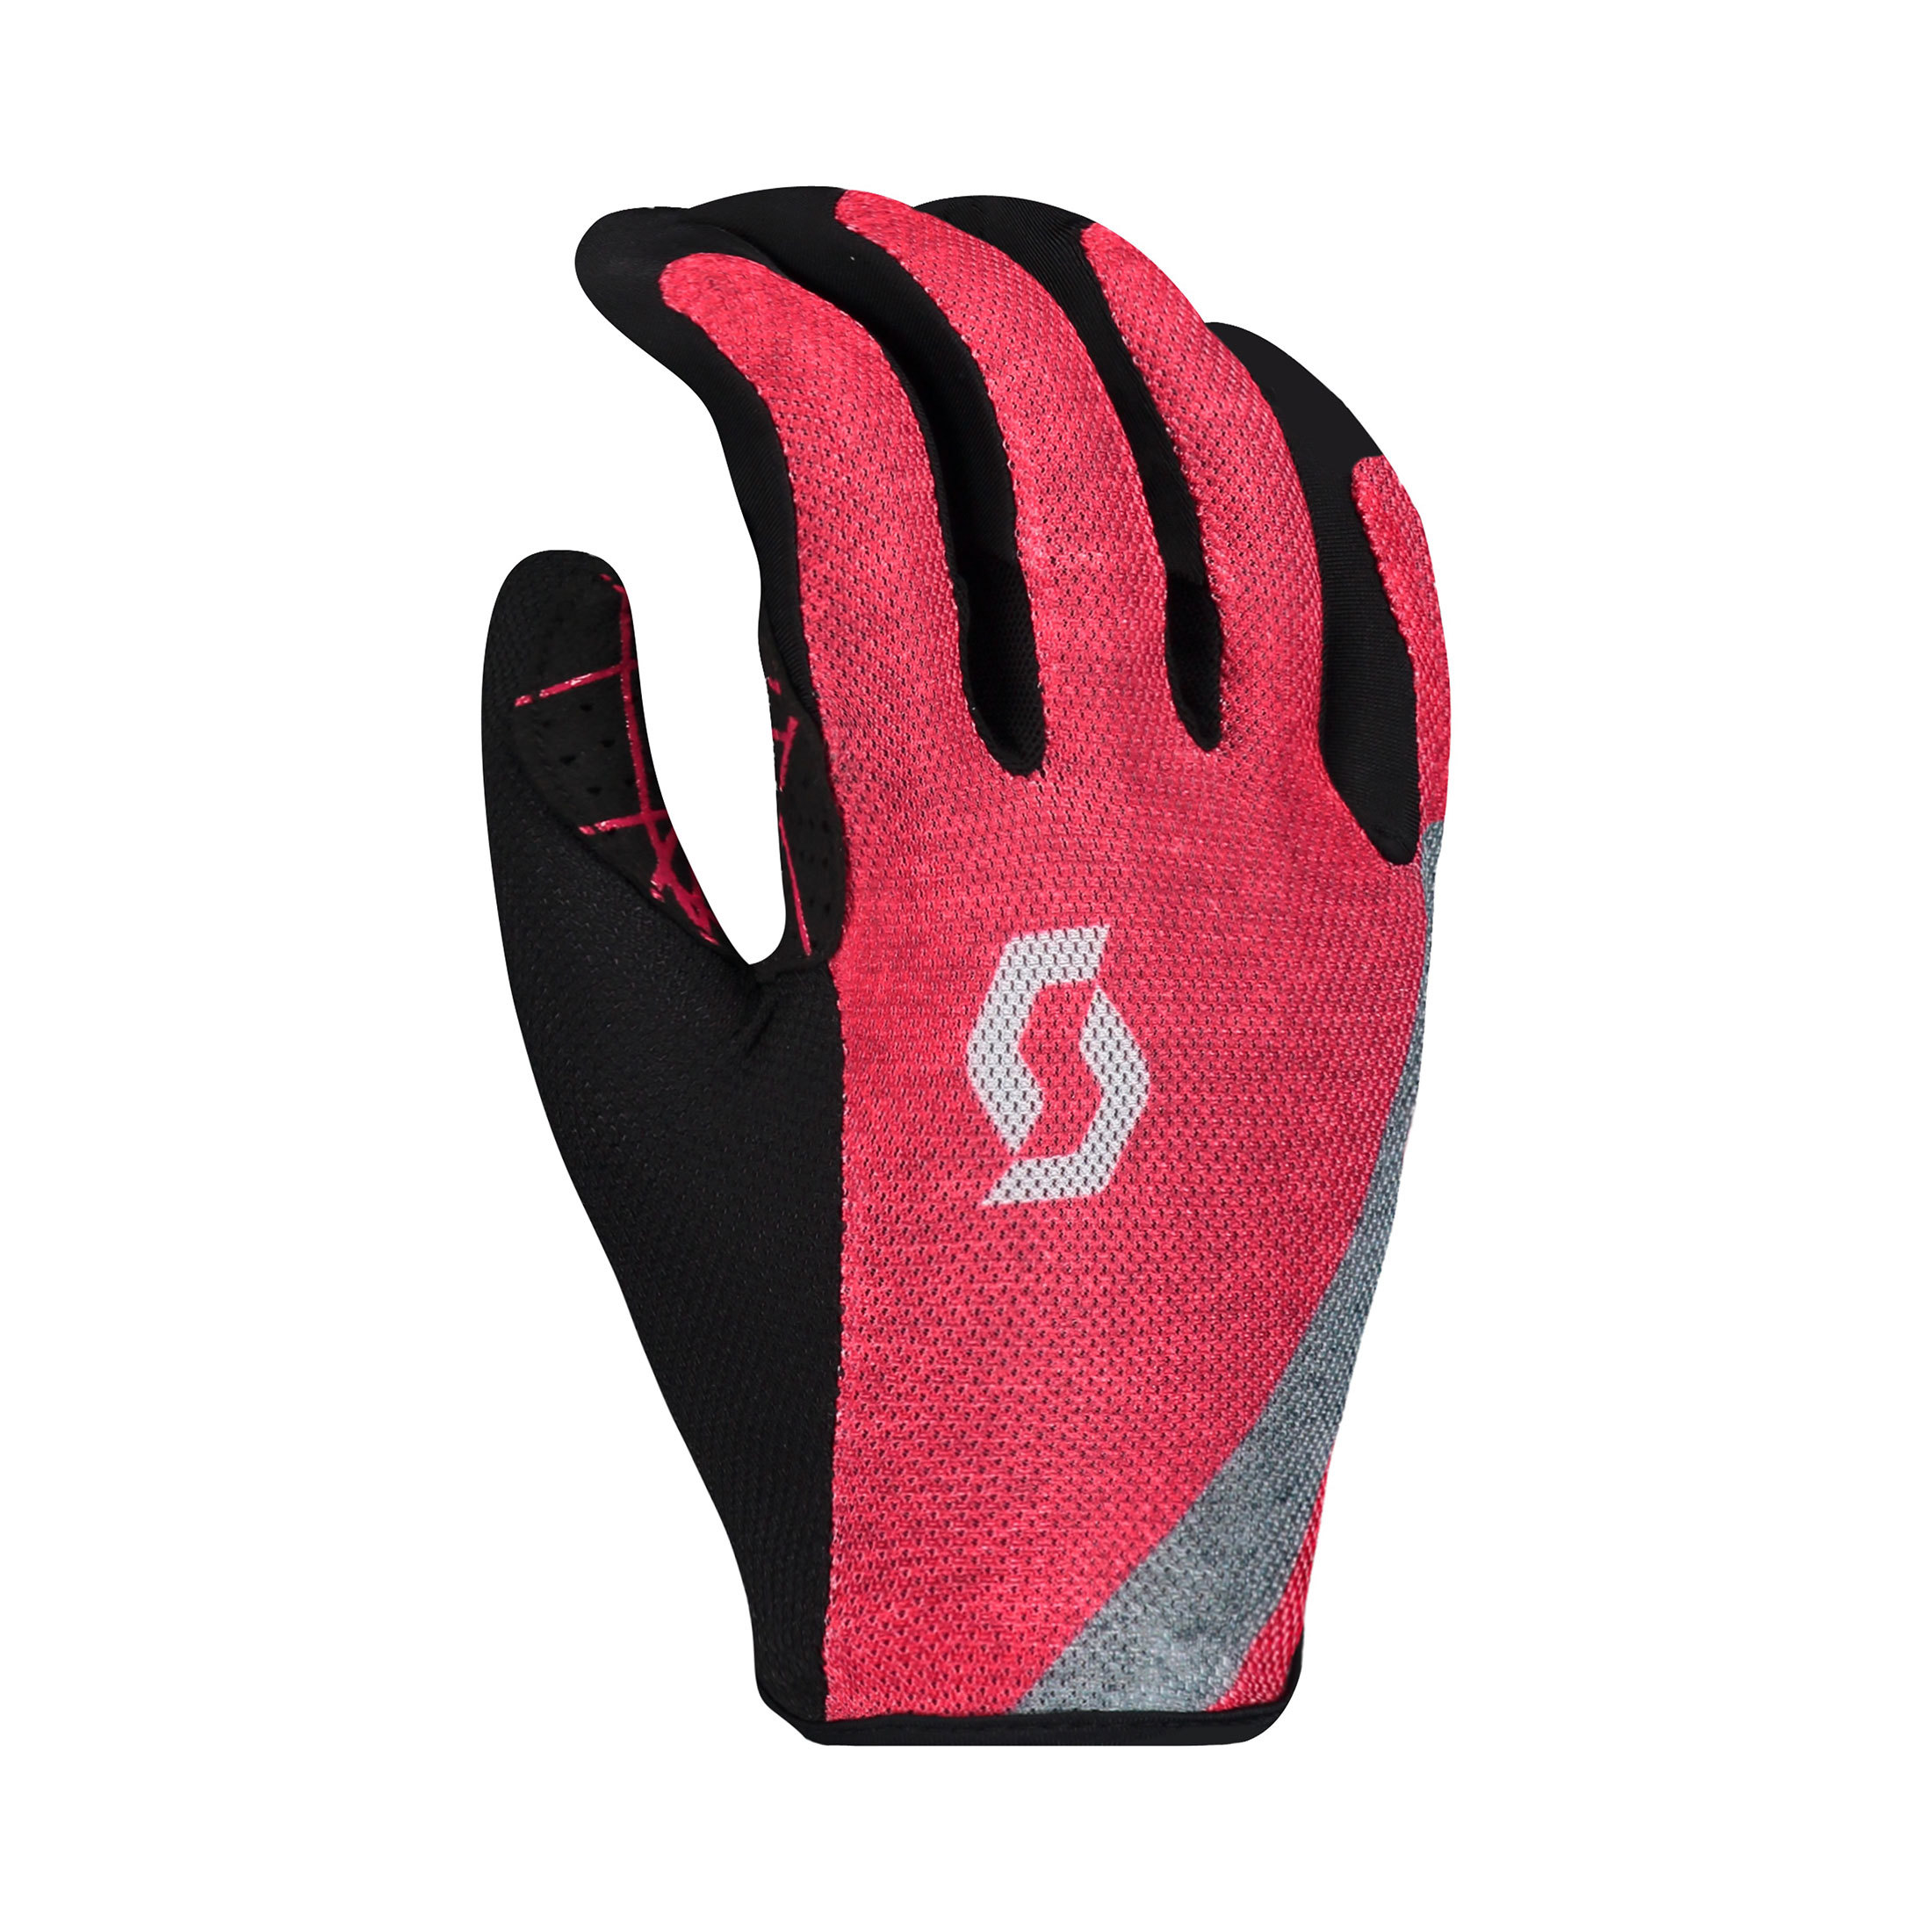 Alquiler Guantes de Ciclismo Mujer